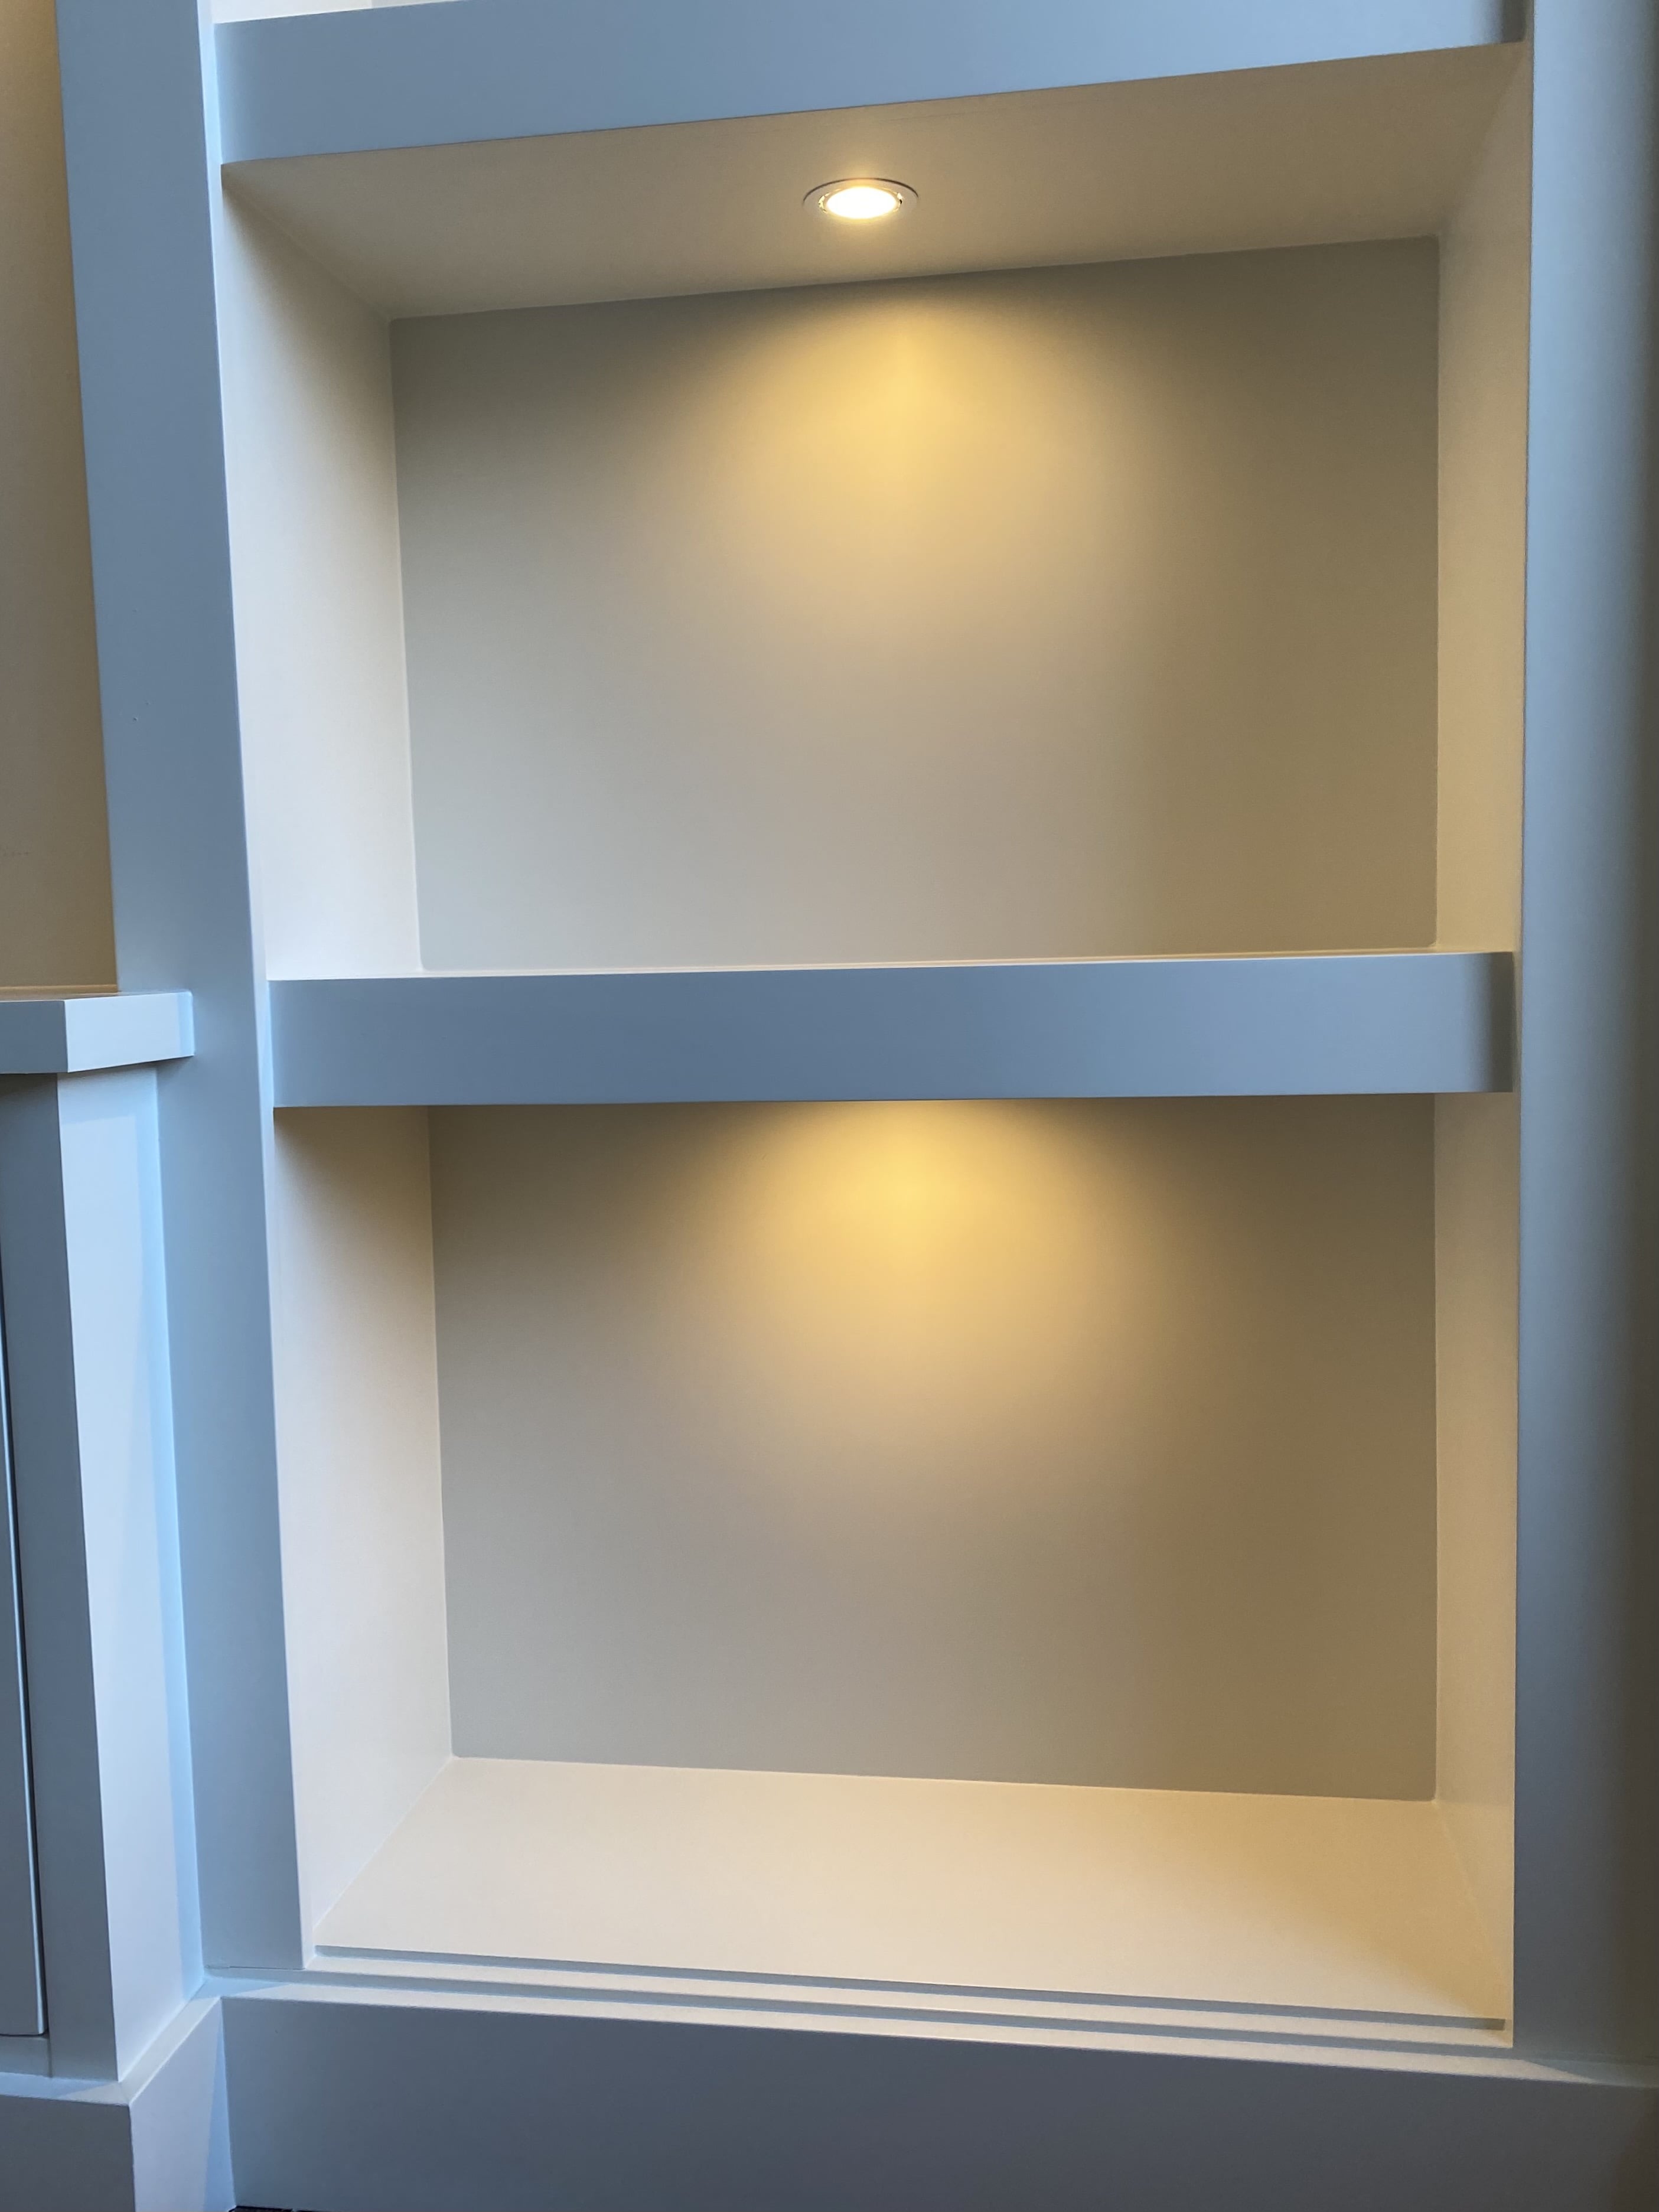 The shelves have dimmable LED puck lights to set the mood.